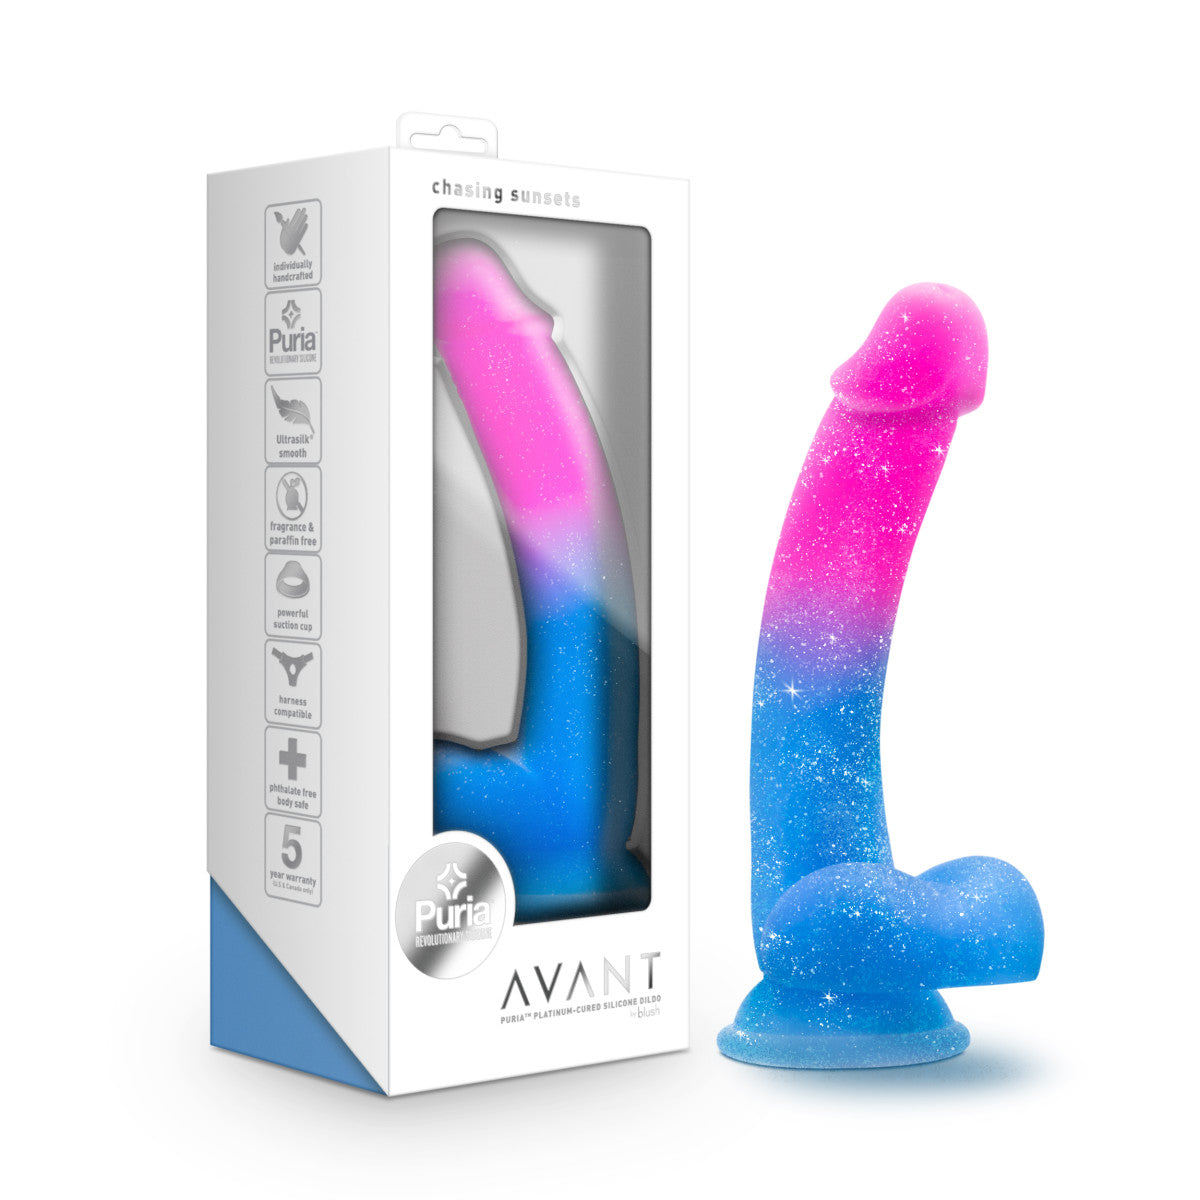 Avant | Chasing Sunsets Mermaid: Artisan 8 Inch Dildo with Suction Cup Base - Made with Smooth Ultrasilk® Purio™ Silicone